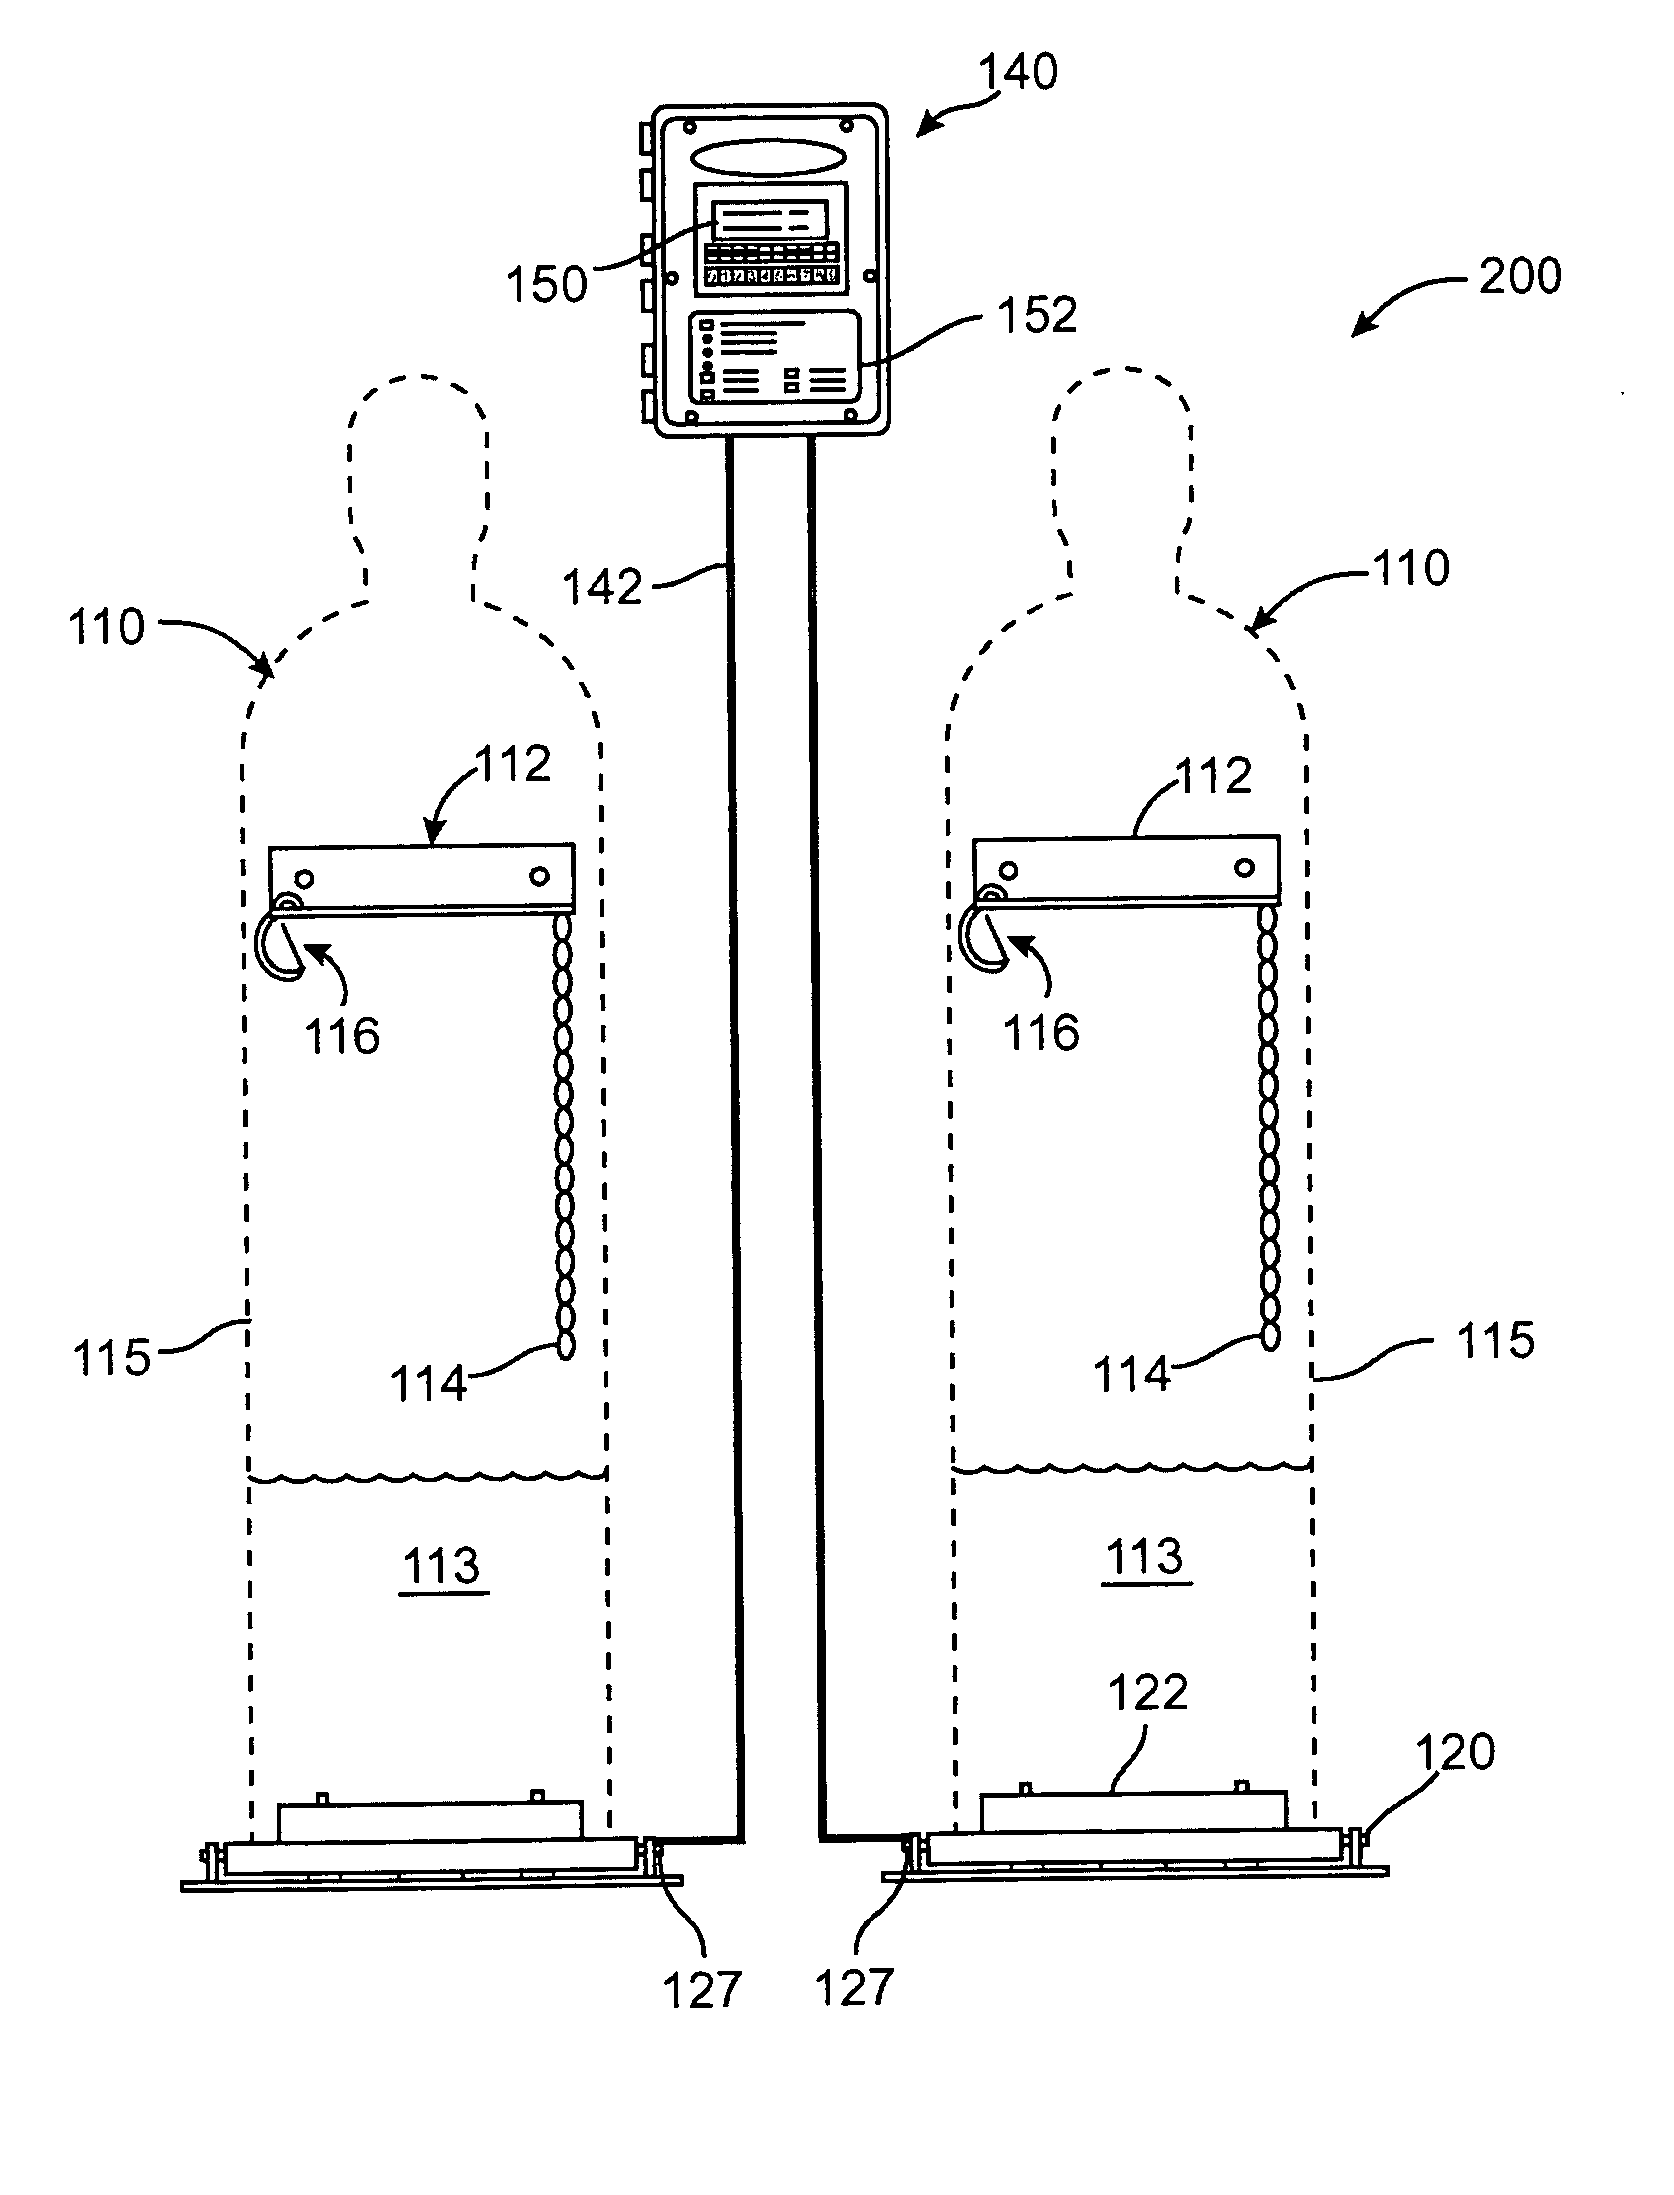 System and method for detecting and displaying an amount of chemical in a cylinder or vessel